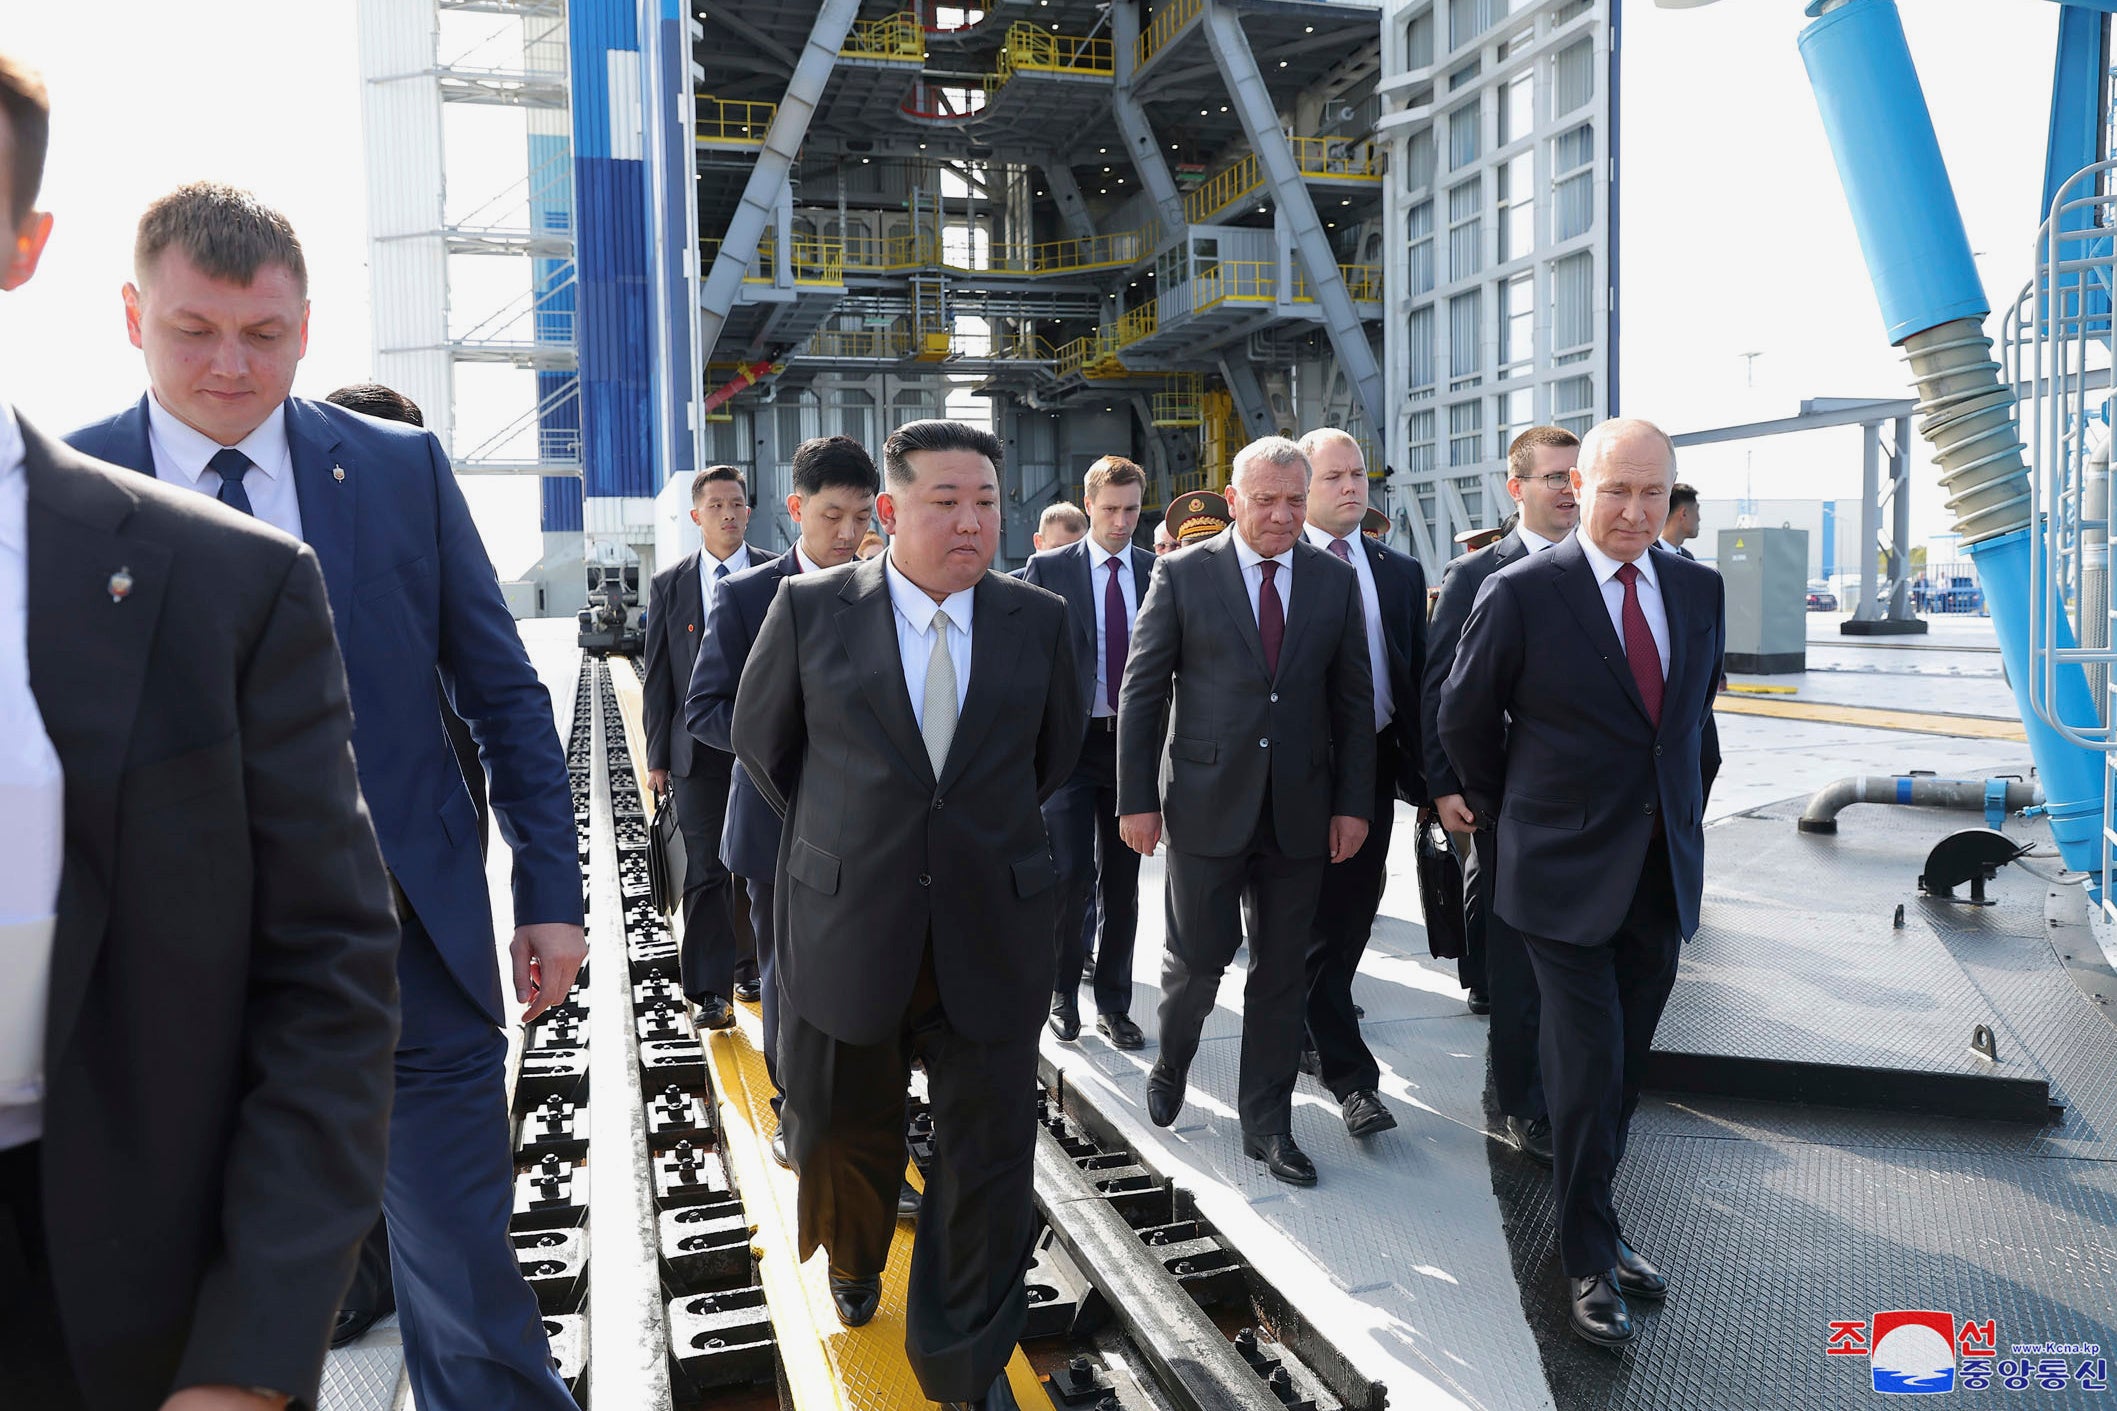 Their meeting at Vostochny Cosmodrome, suggsted North Korean leader Kim Jong-un is seeking Russian help in developing military reconnaissance satellites.